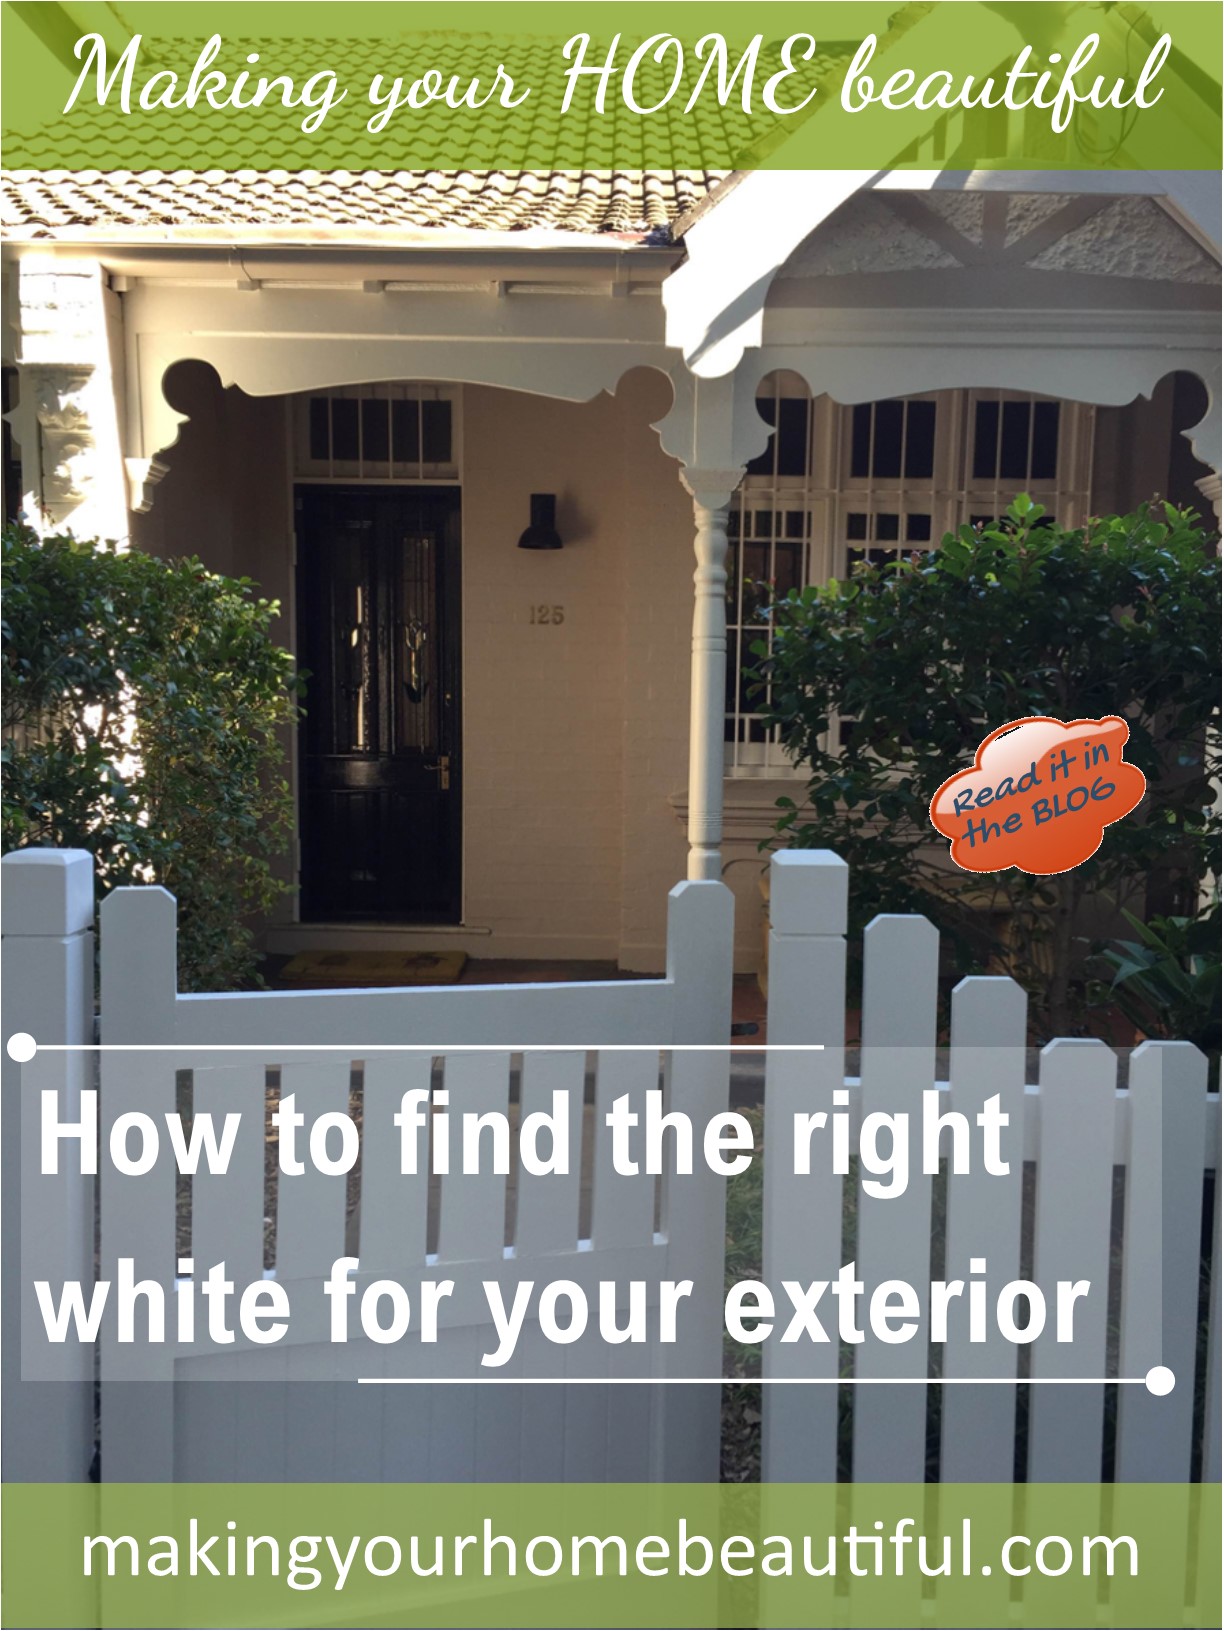 How to find the right white for your exterior